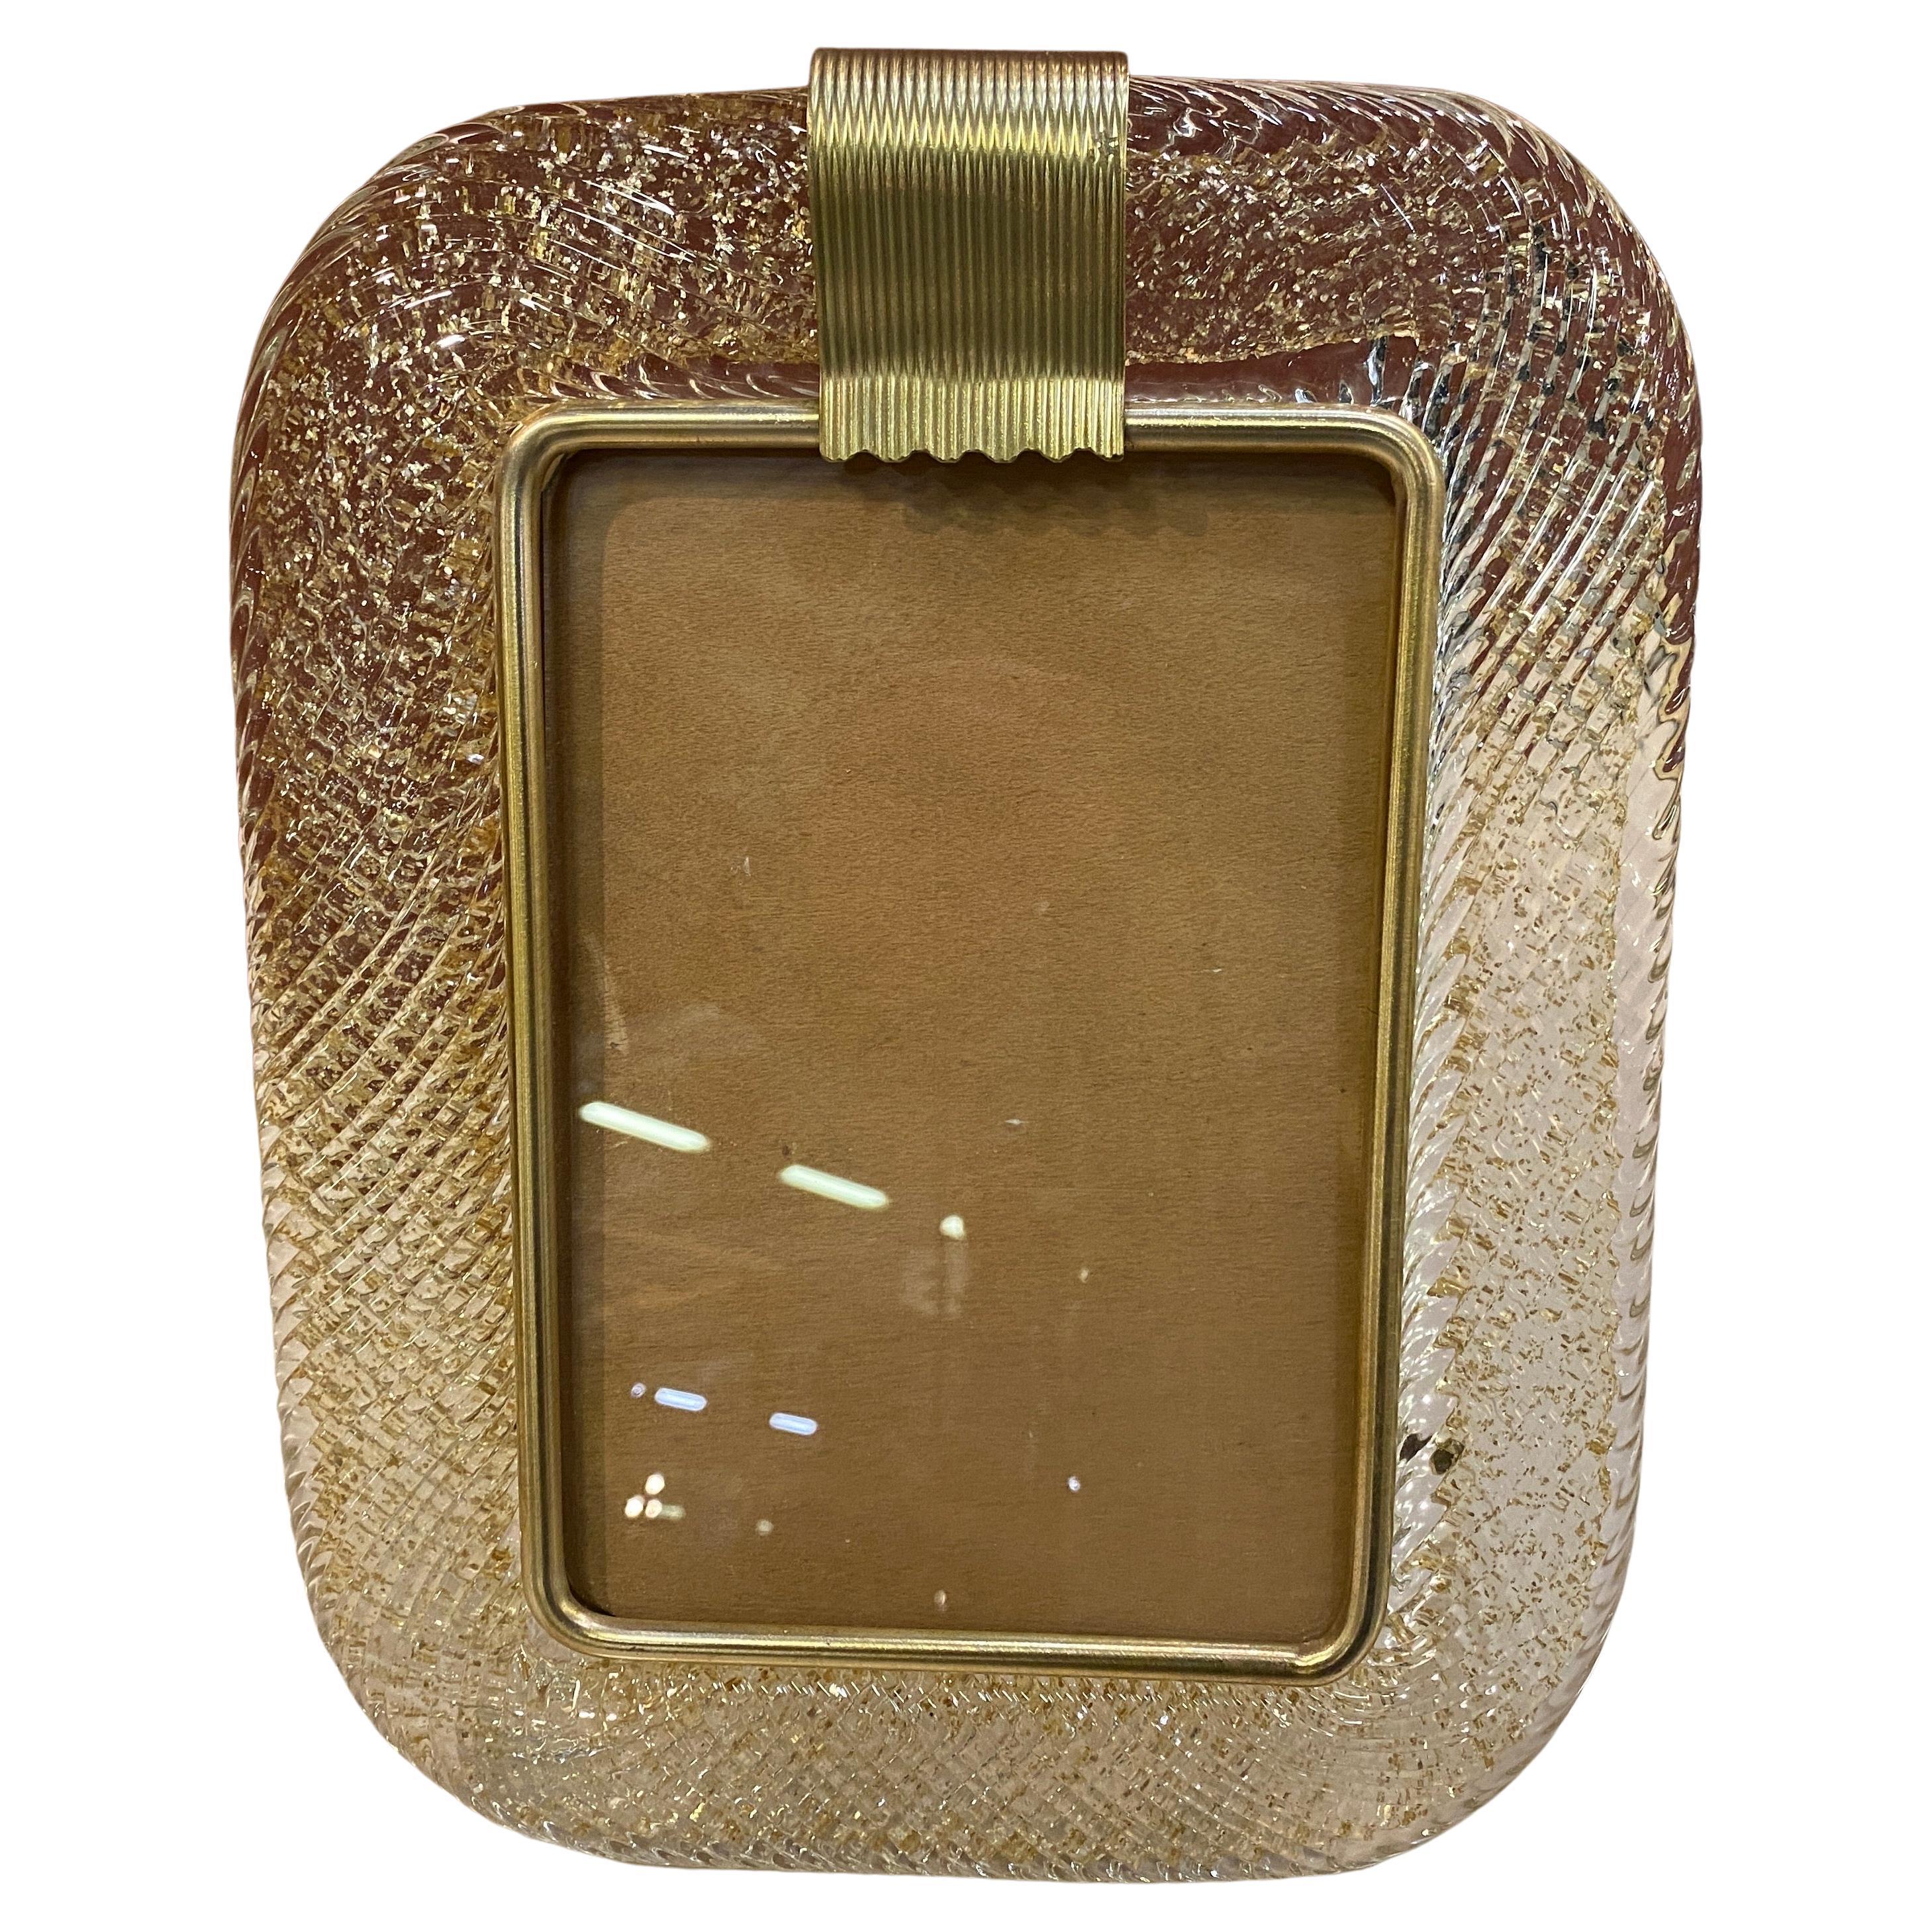 A Mid-Century Modern gold and transparent murano glass picture frame designed and hand-crafted in Venice, it's in good conditions overall, brass it's in original patina. It's an iconic Mid-Century Modern piece of the famous manufacturer Barovier.